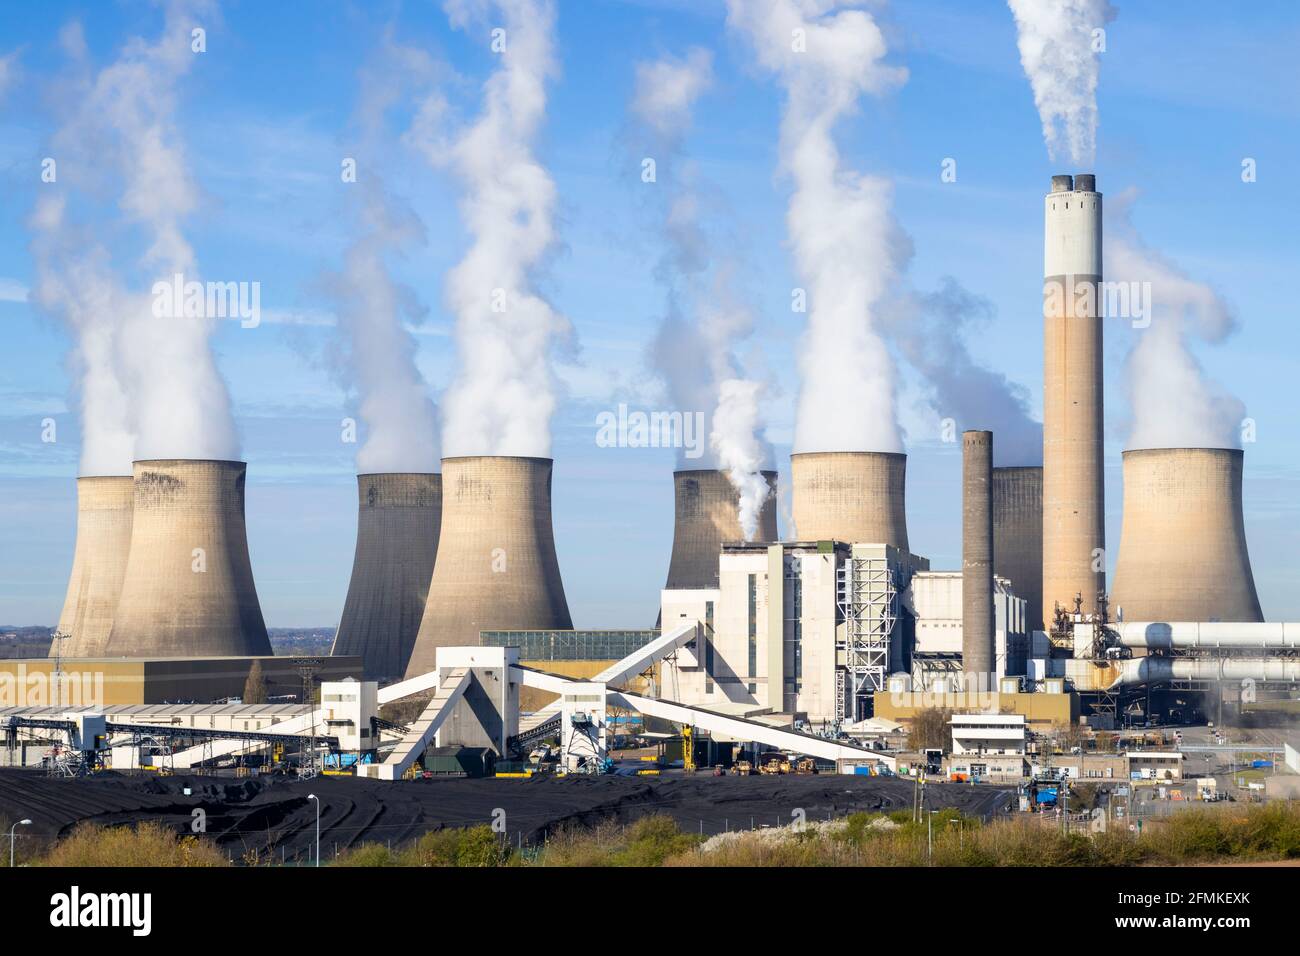 Air pollution from Ratcliffe-on-Soar power station a coal power station and cooling towers Ratcliffe on soar Nottinghamshire England UK GB Europe Stock Photo